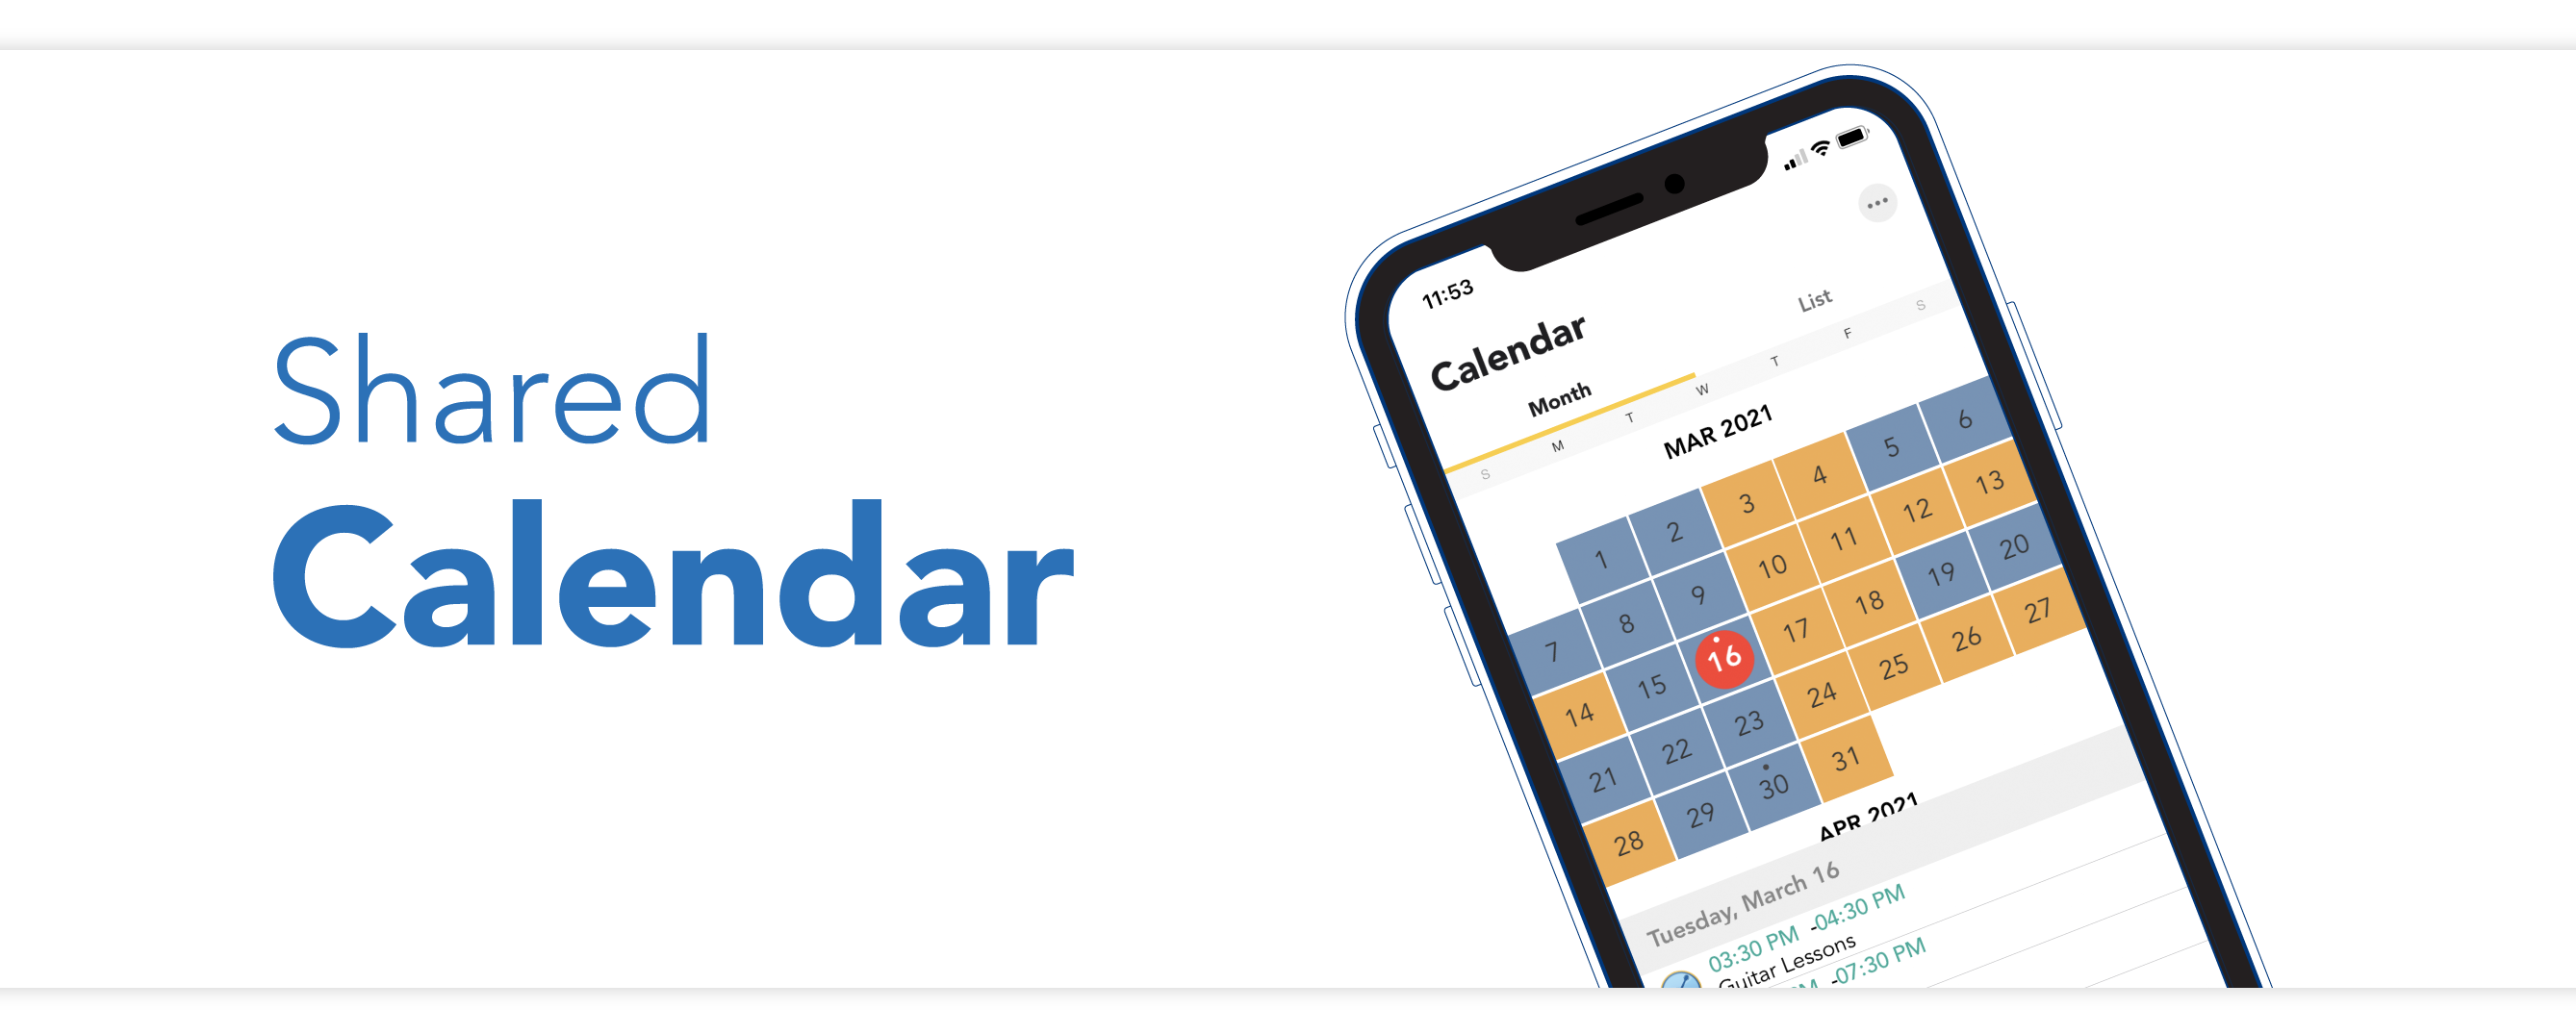 Check your parenting time, schedule events, and more with the shared calendar on the OFW mobile app.